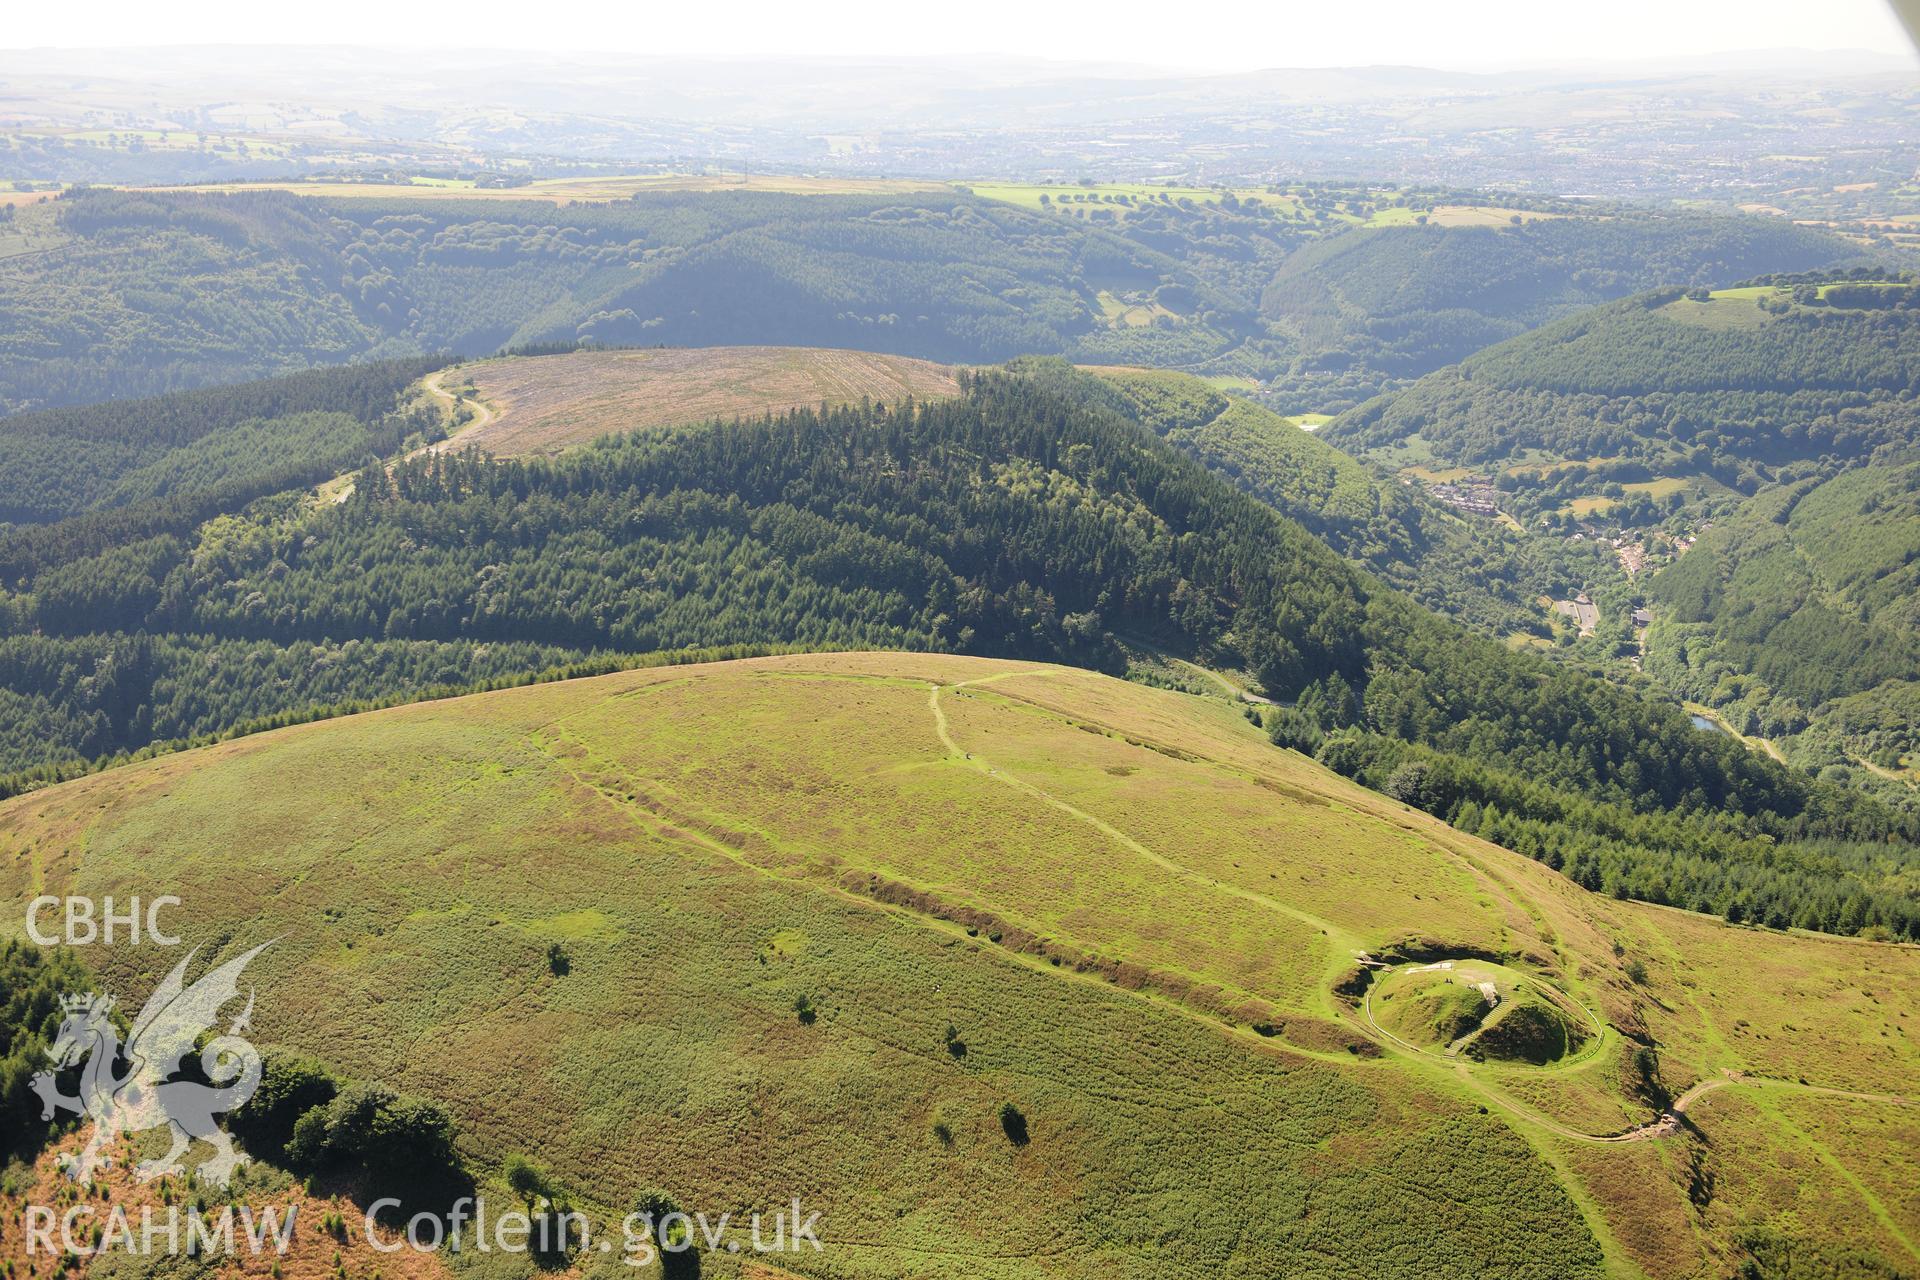 RCAHMW colour oblique photograph of Twmbarlwm, Castle and hillfort. Taken by Toby Driver on 24/07/2012.